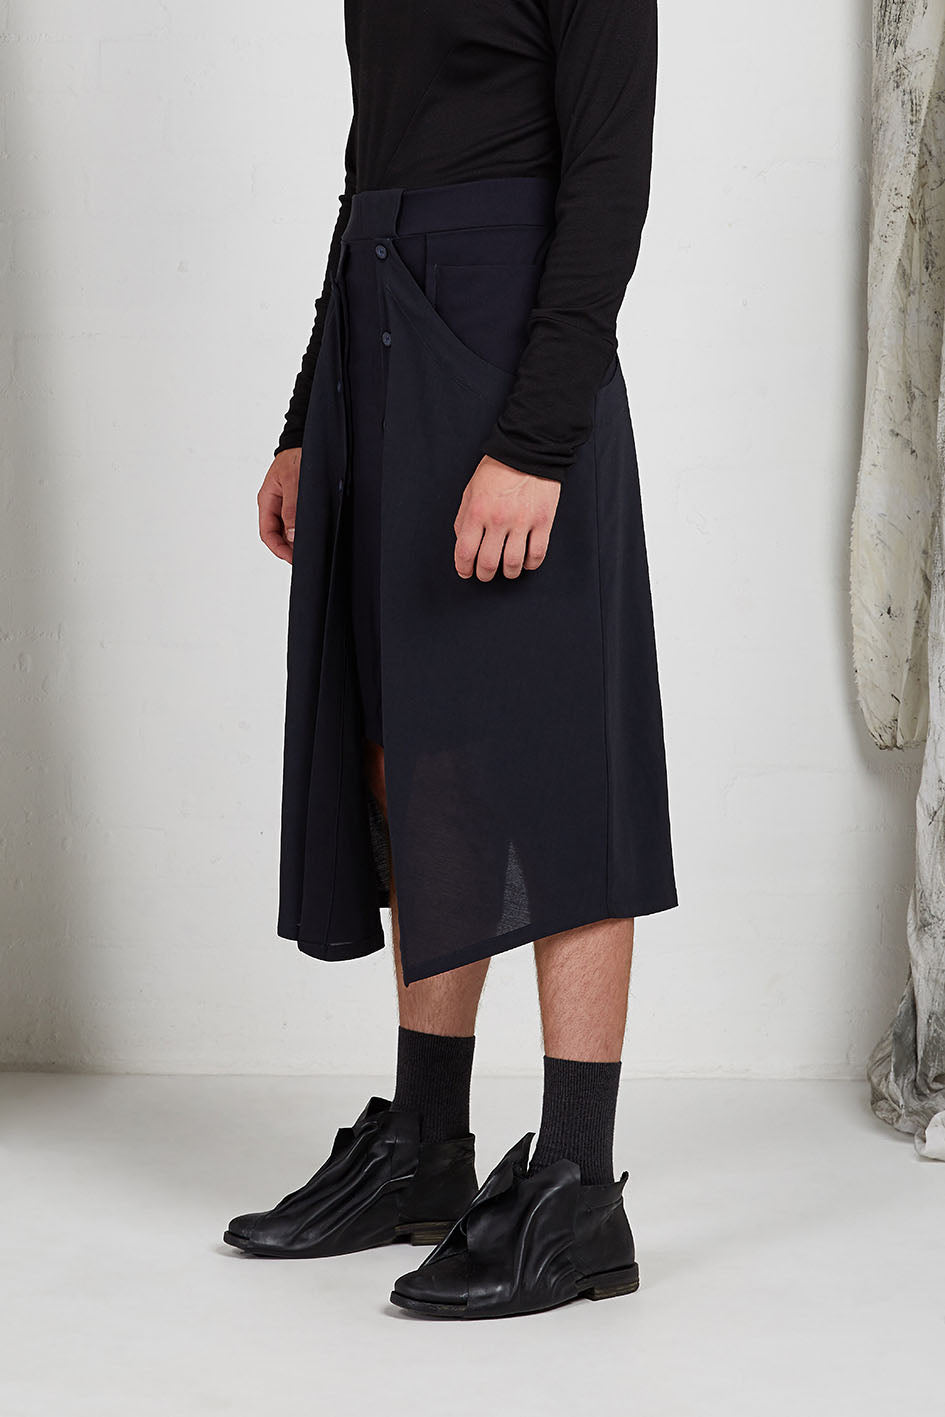 Tailored Menswear Unisex Skirt with Button off Drape Panels in Italian Wool Crepe Suiting